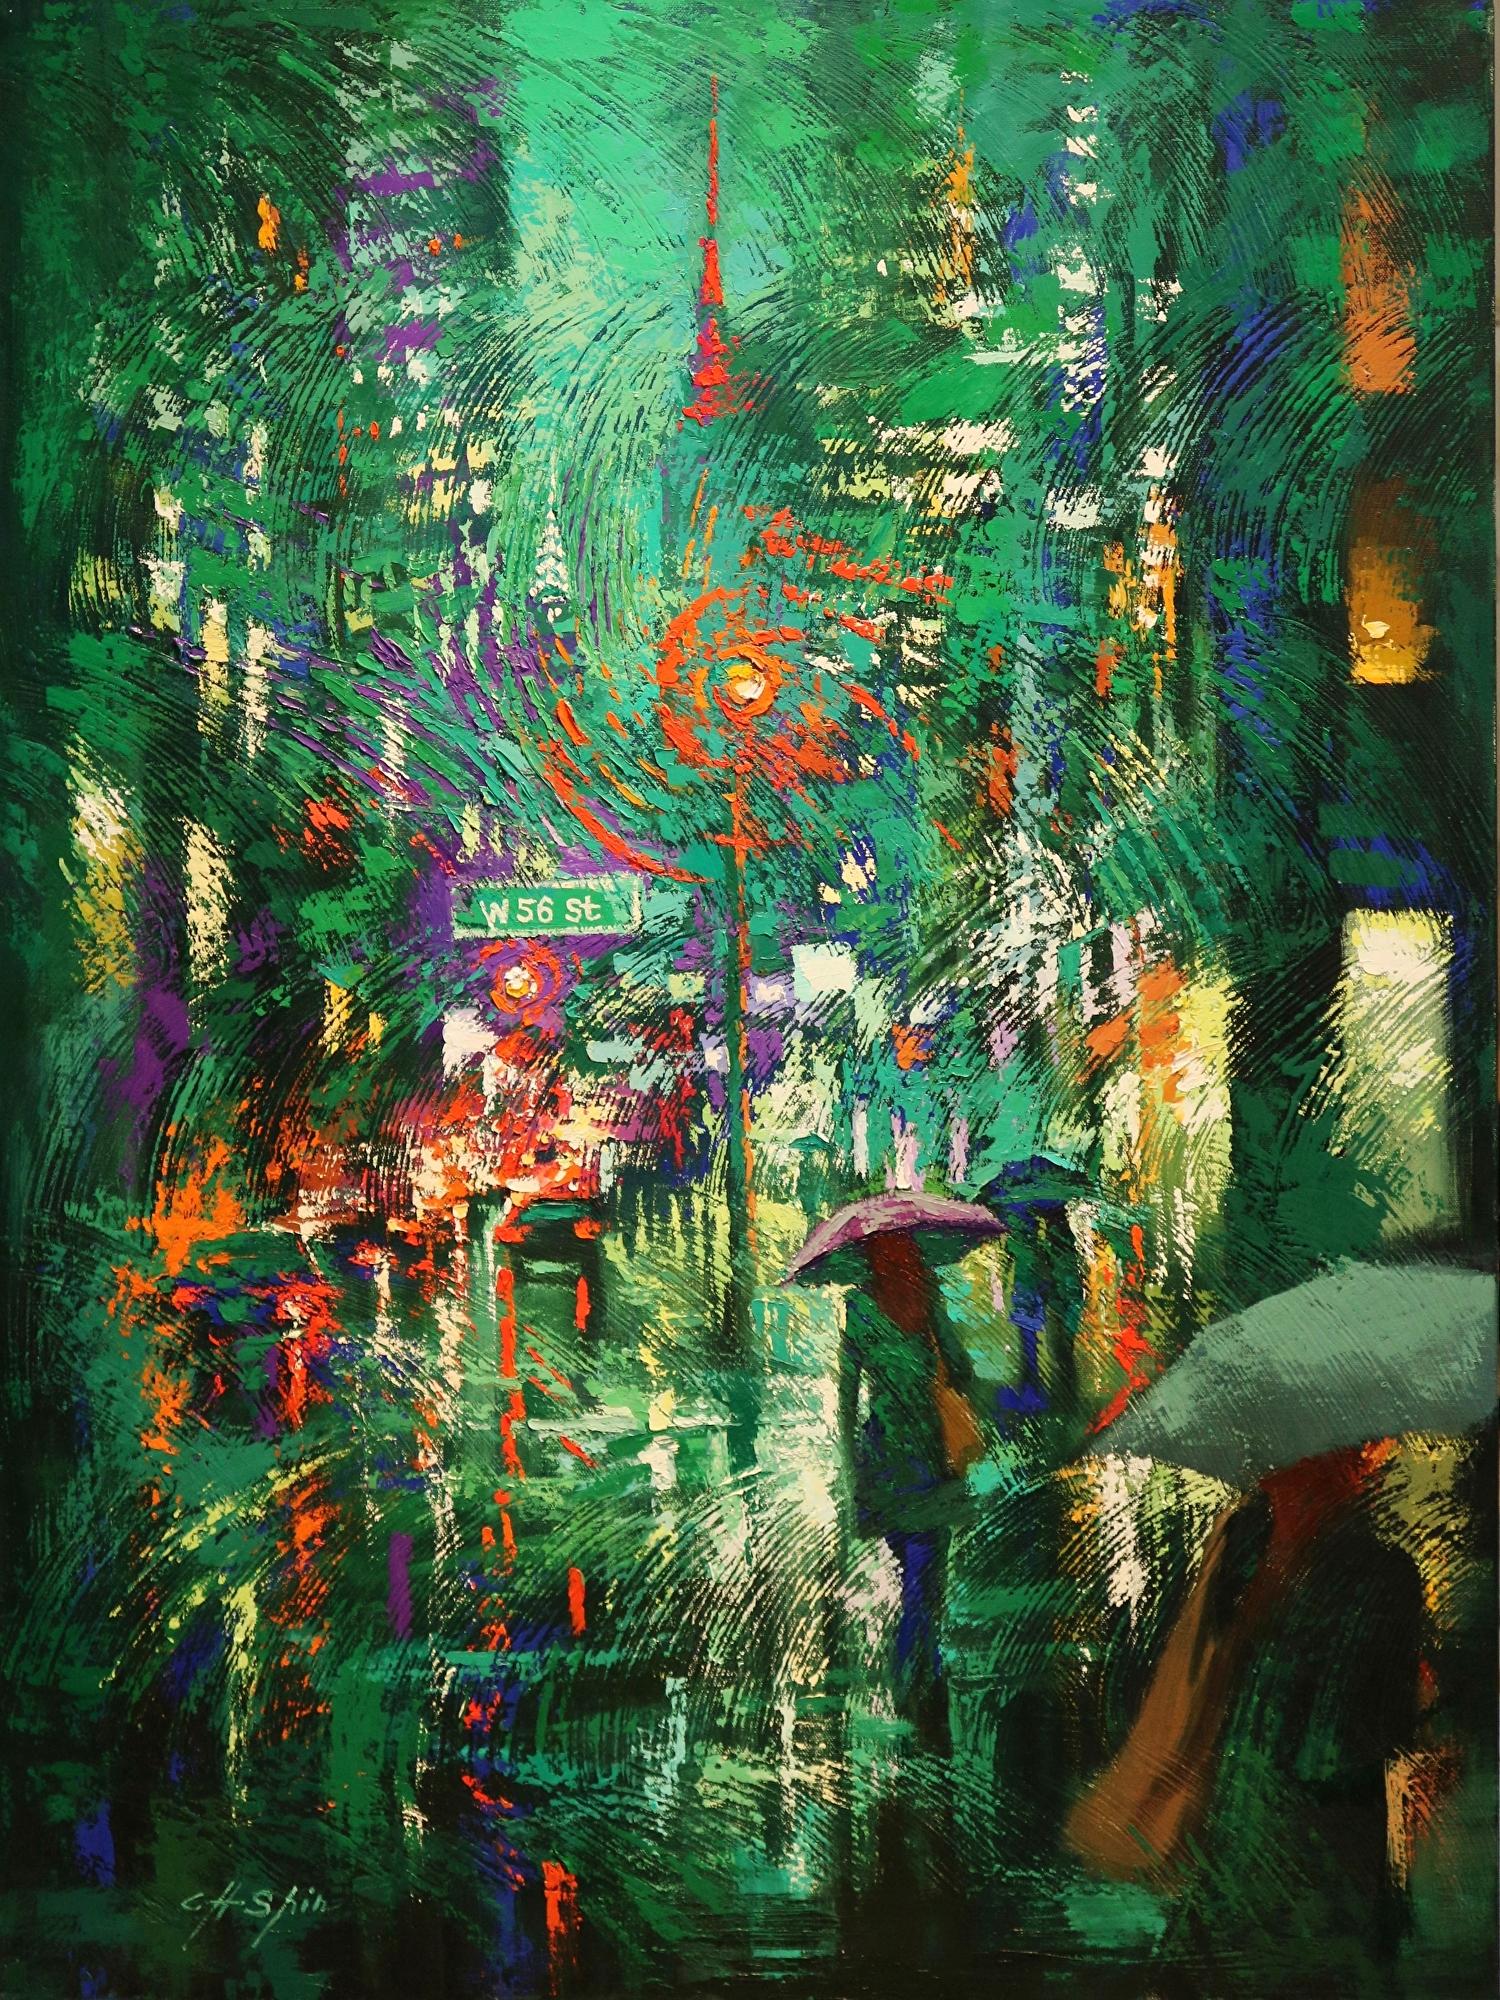 Oil on Canvas      40 x 30 x 1.5 inches      from Broadway New York City      * I often travel to New York city since it's very close to drive around, soon becomes evening,        When Rain drops in this Green evening, suddenly all these people and